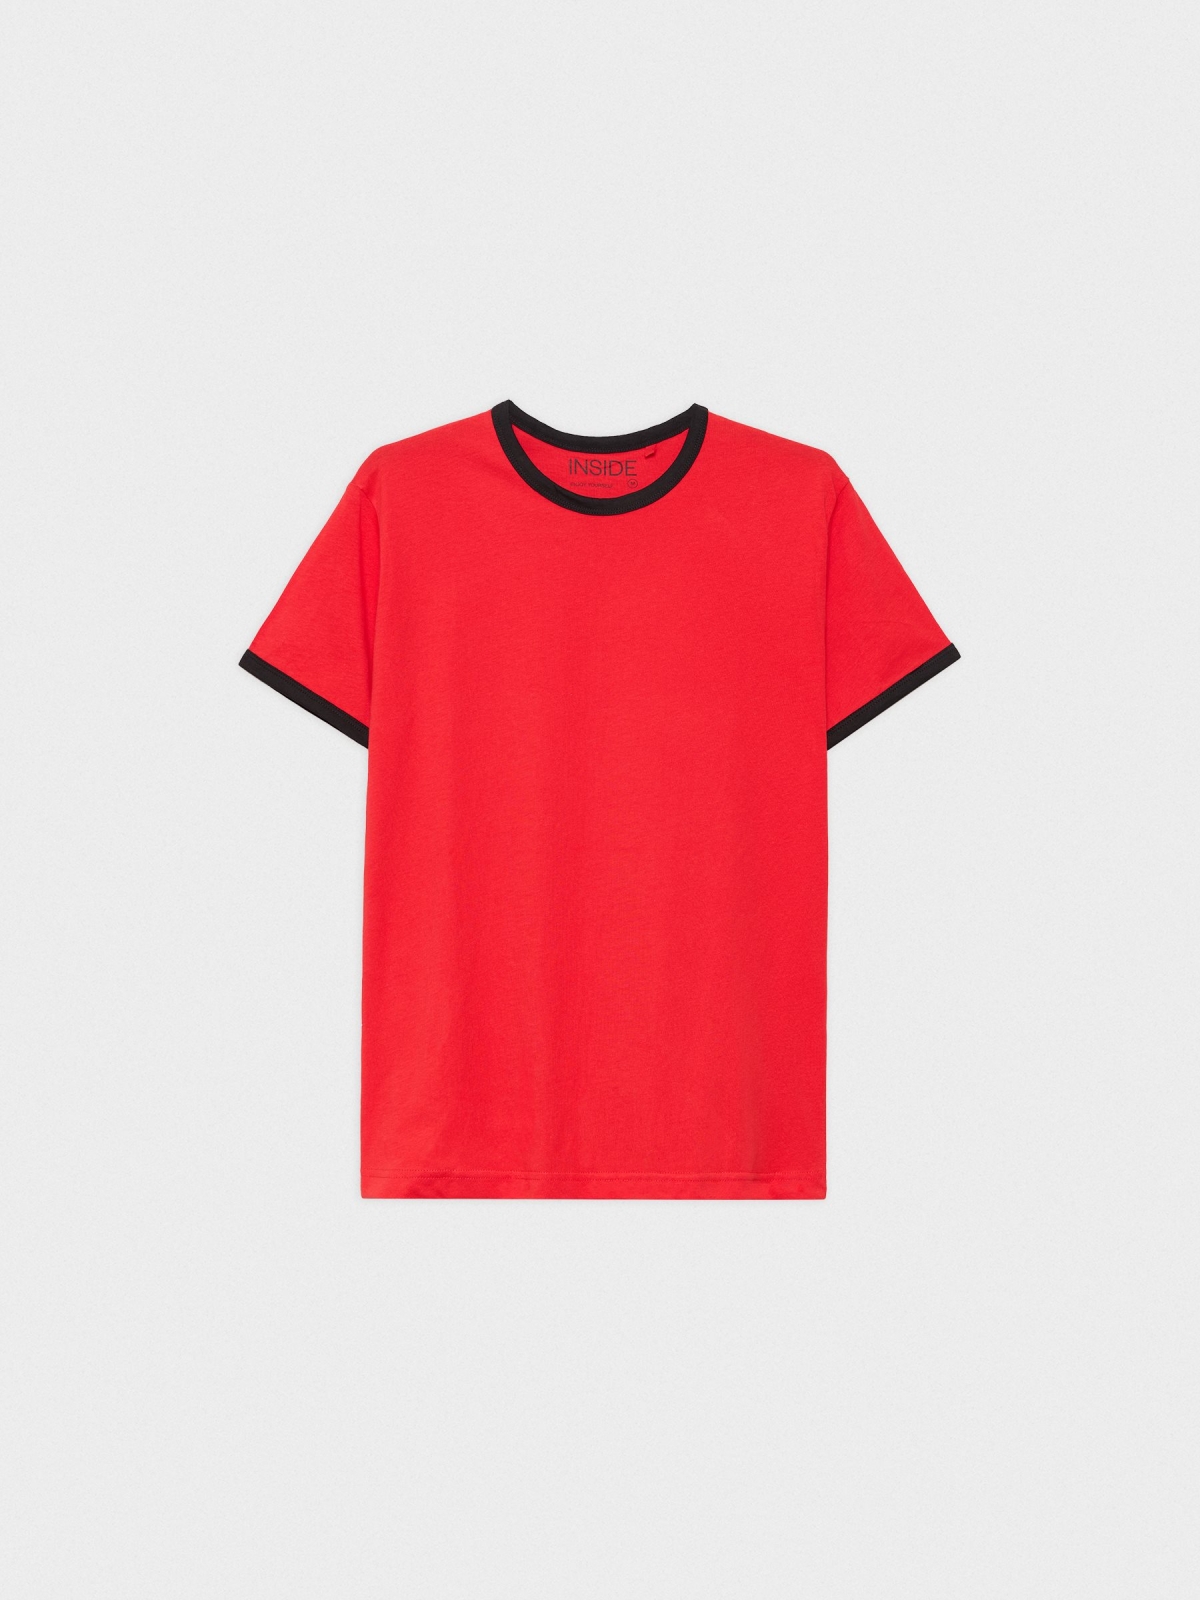  Basic T-shirt contrasts red